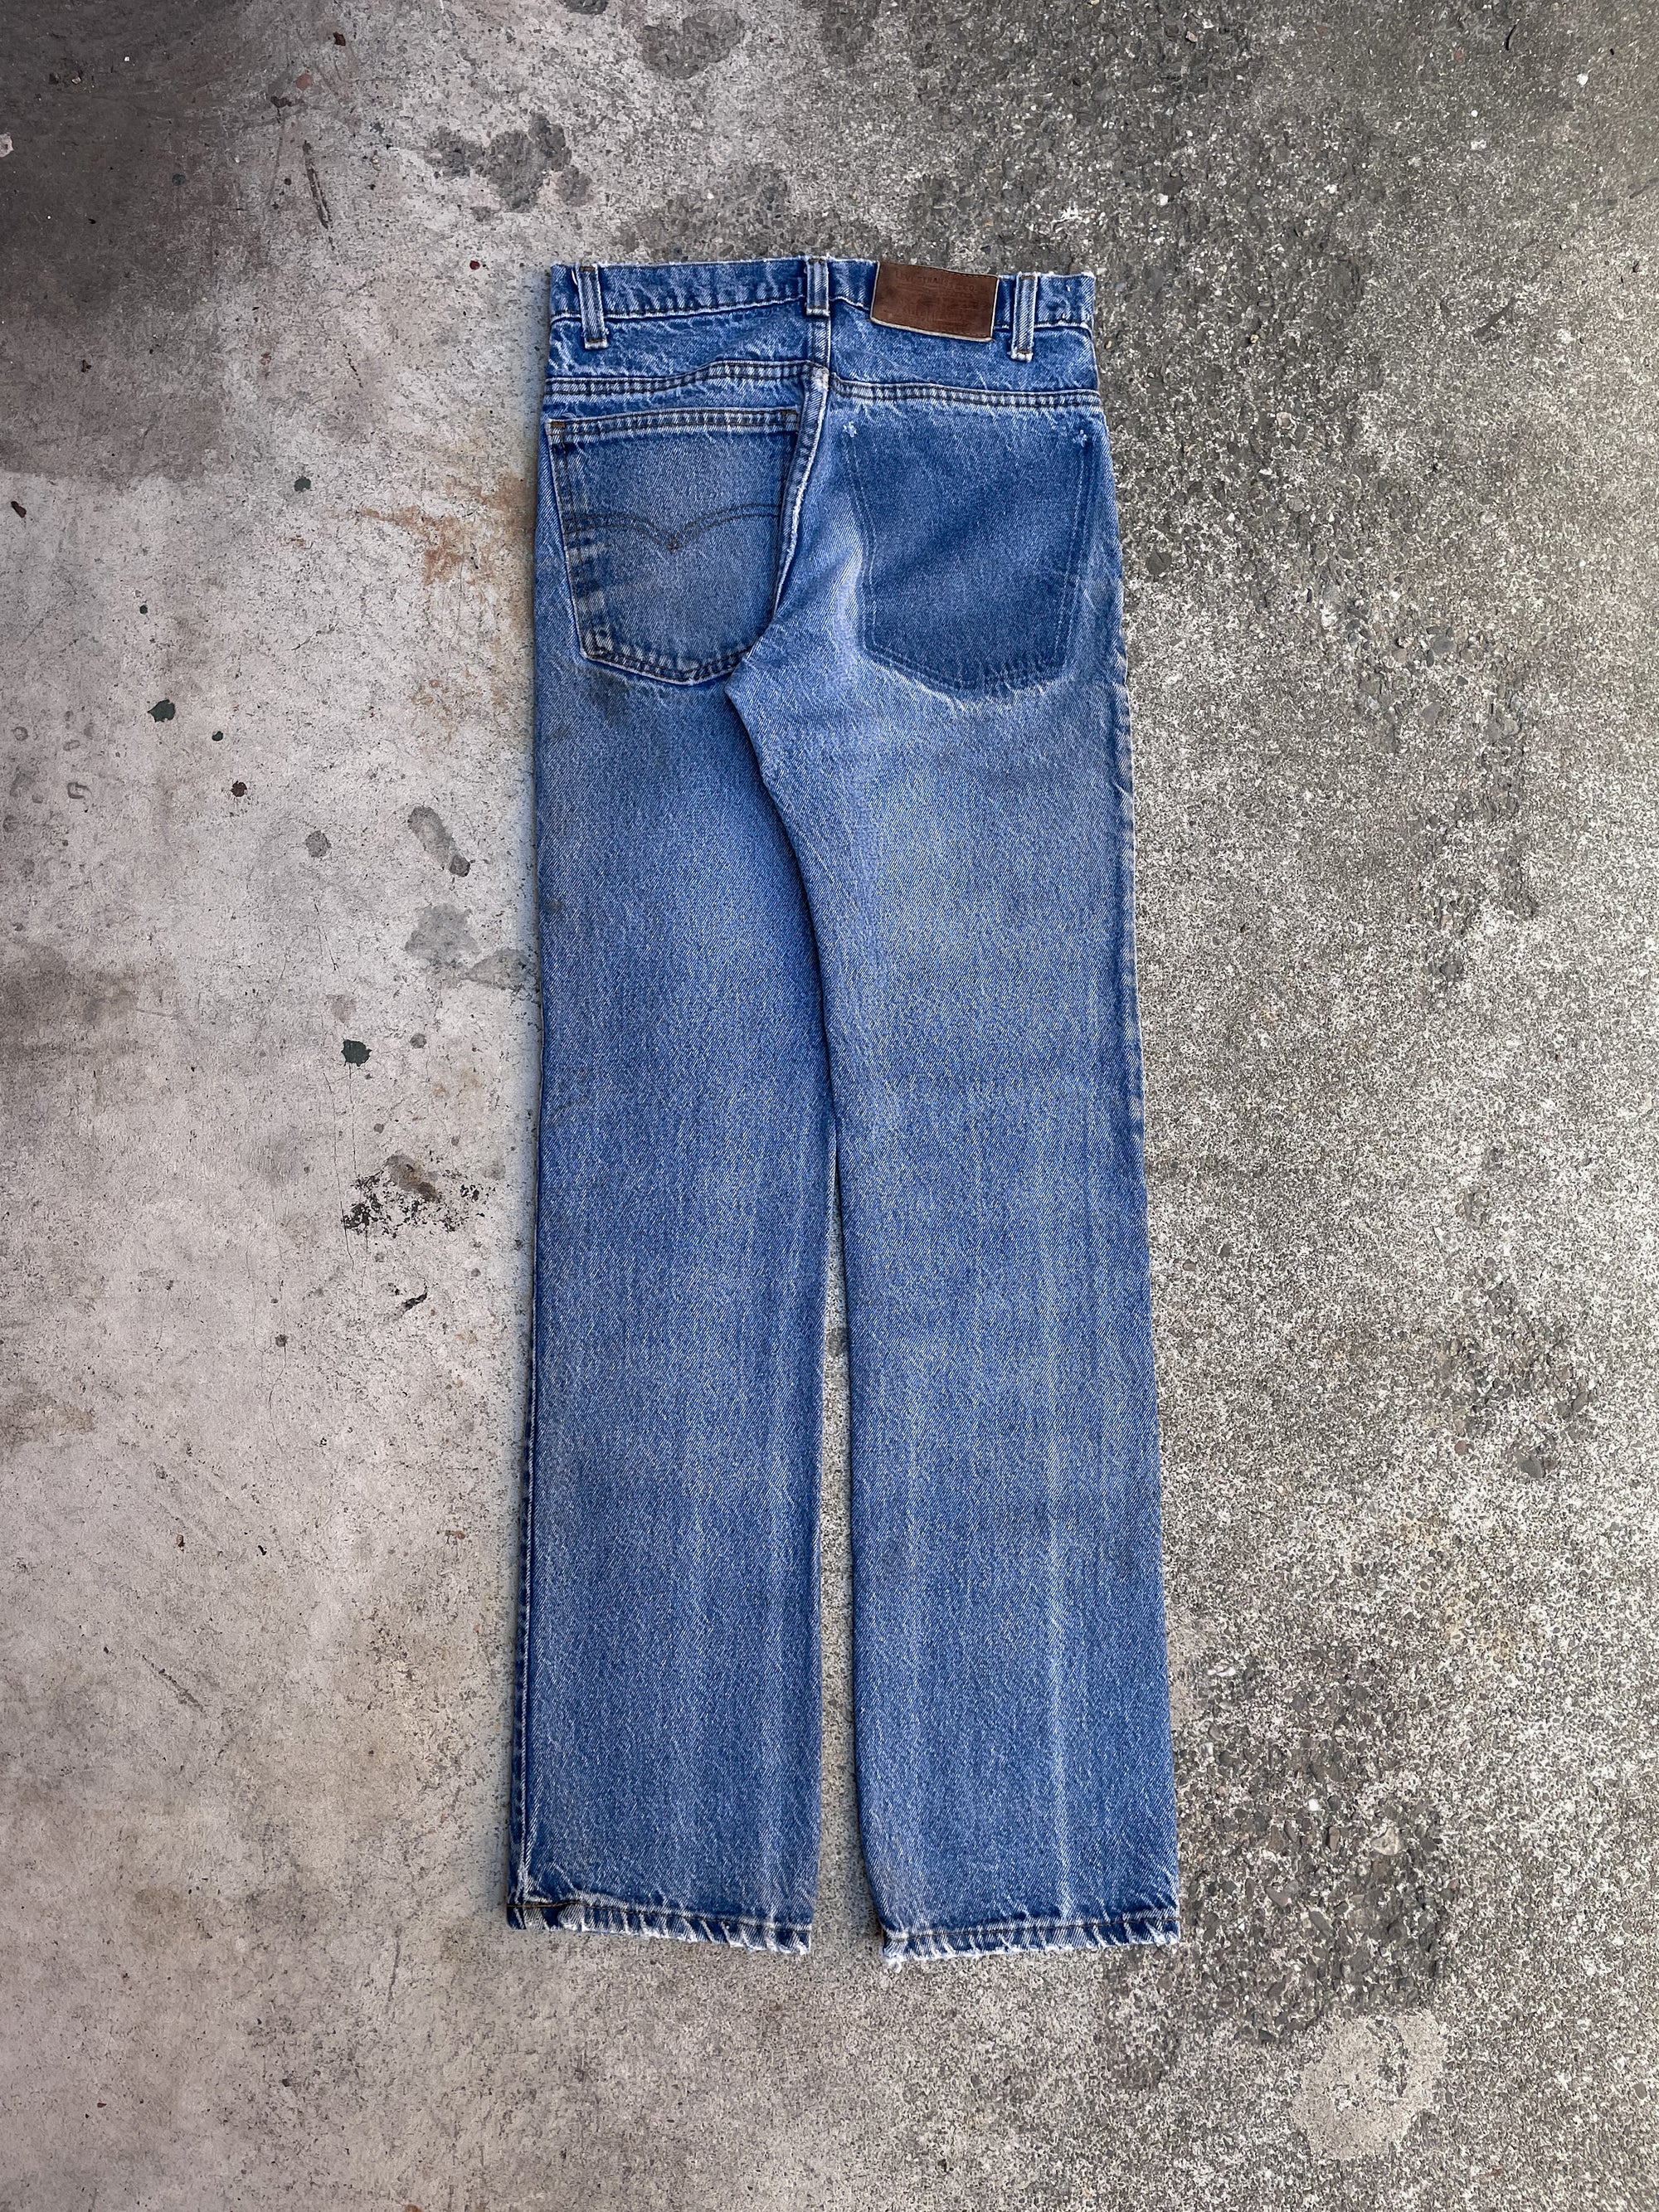 1970s Levi’s Worn In Blue 509 Removed Pocket (26X29)